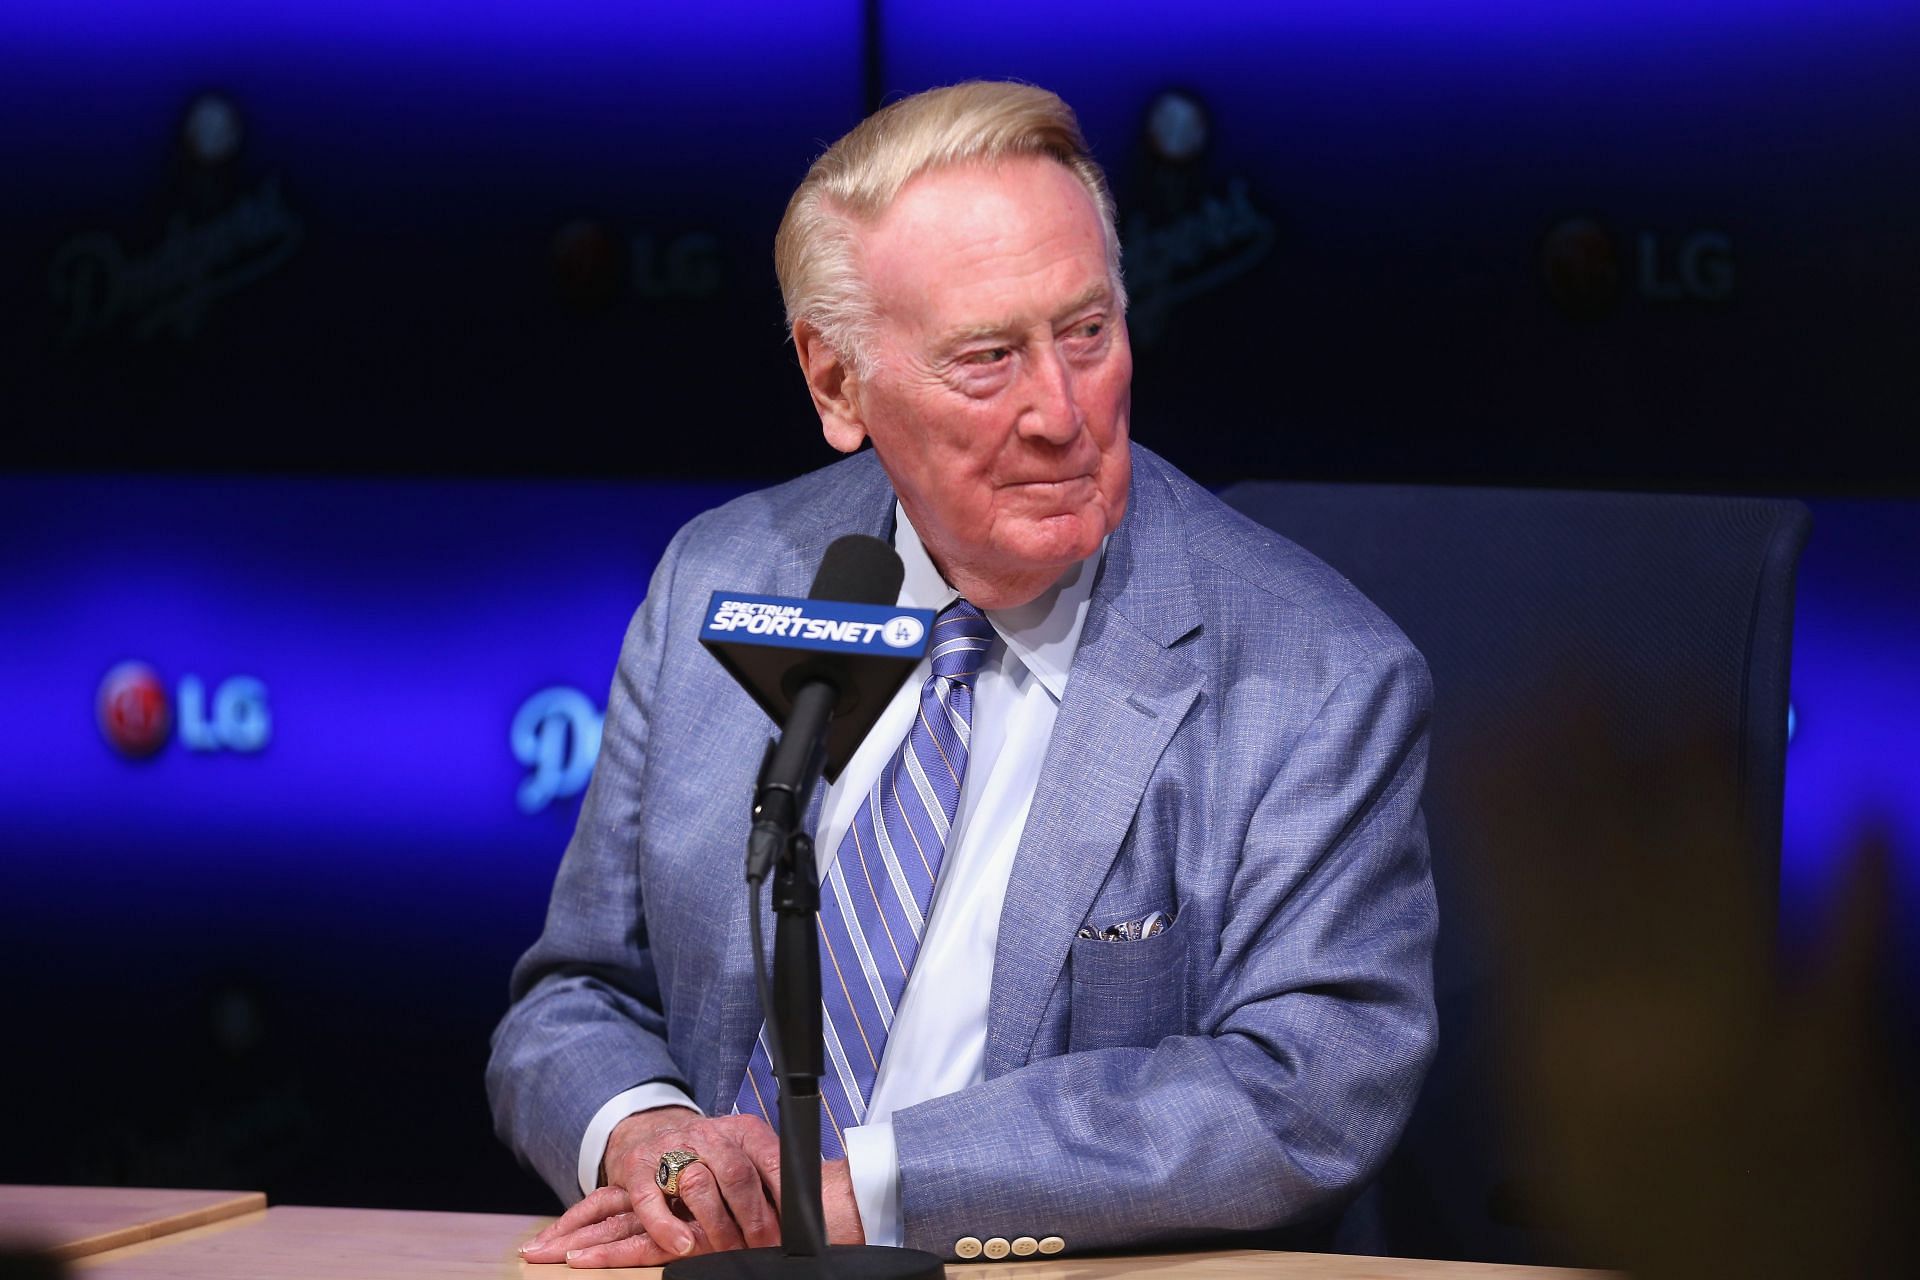 MLB legend Vin Scully died at the age of 94